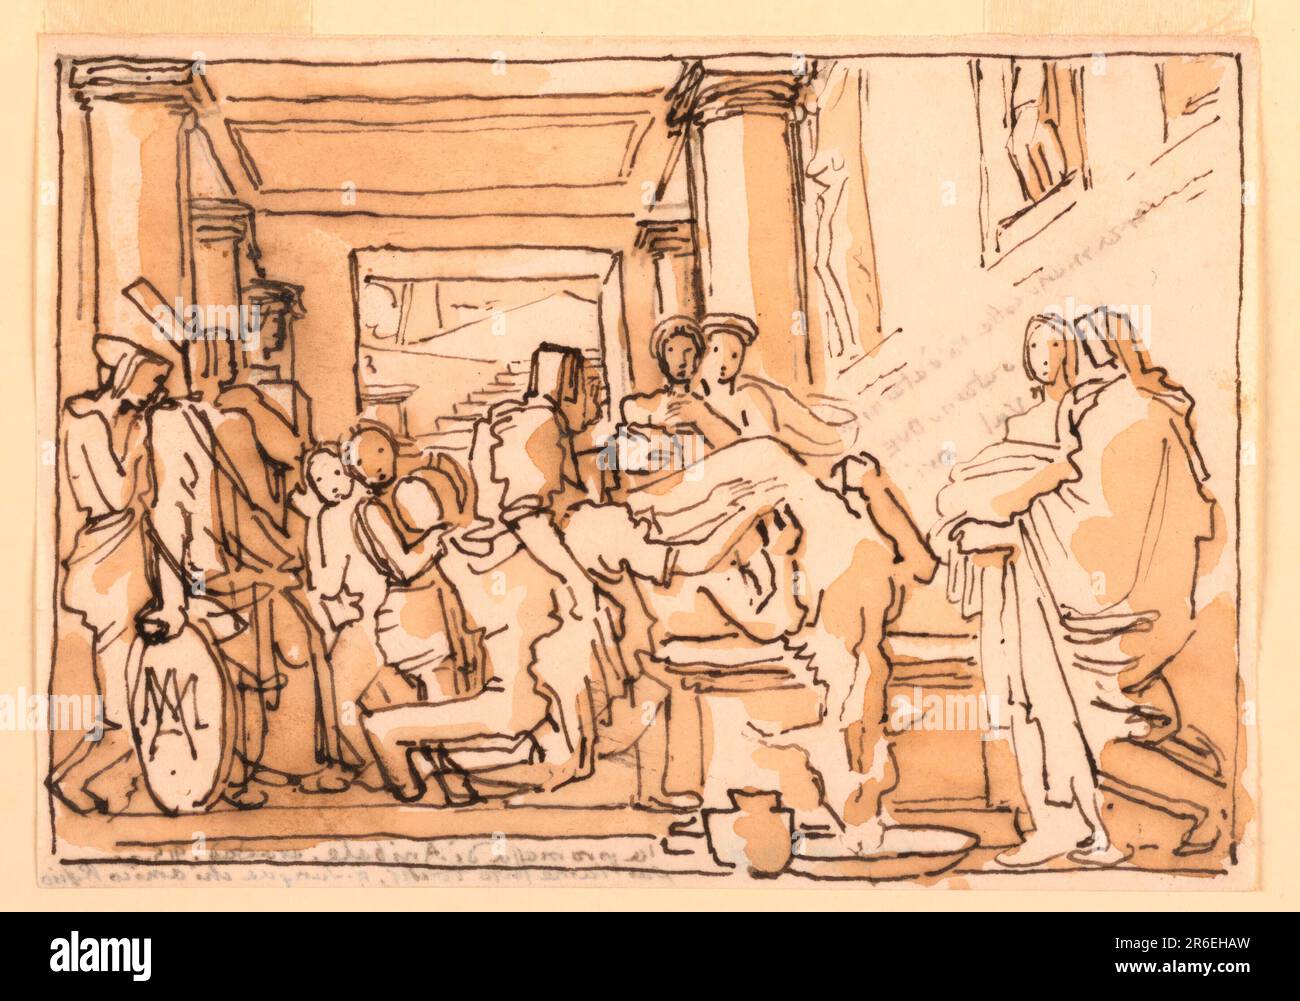 Sketch, Funereal or Deathbed Scene in Classical Interior. Pen and ink, brush and sepia wash on paper. Date: 1820-1850. Museum: Cooper Hewitt, Smithsonian Design Museum. Stock Photo